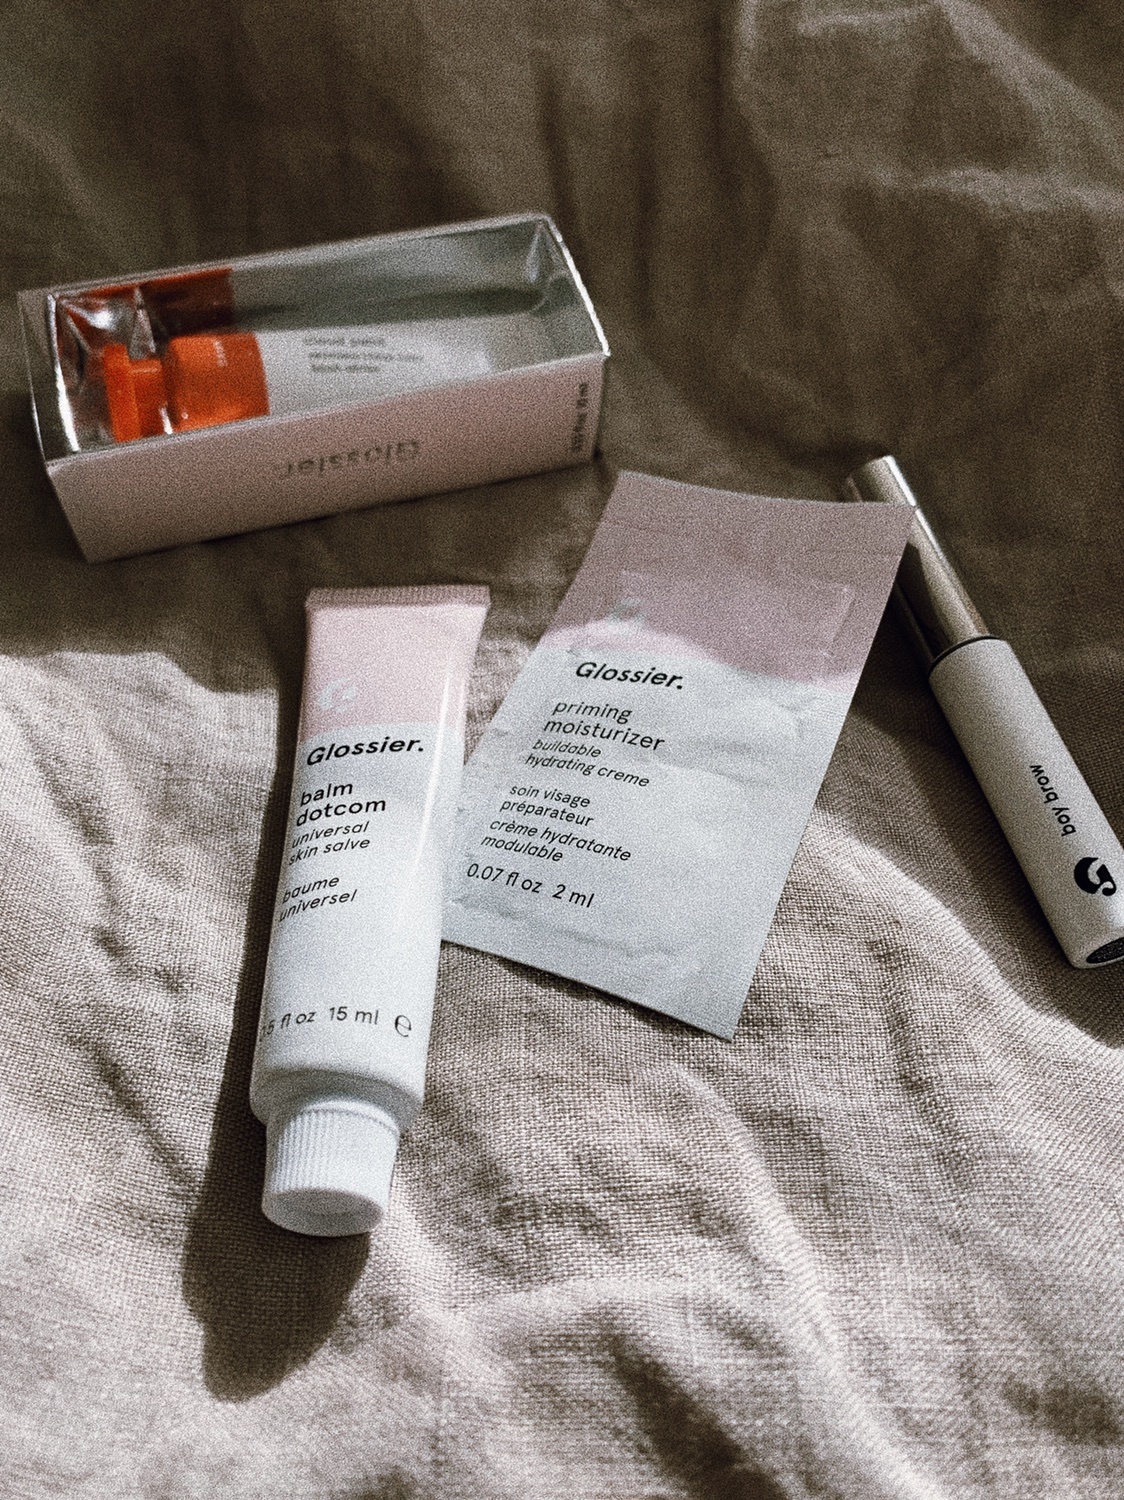 Glossier Products We Can't Live Without